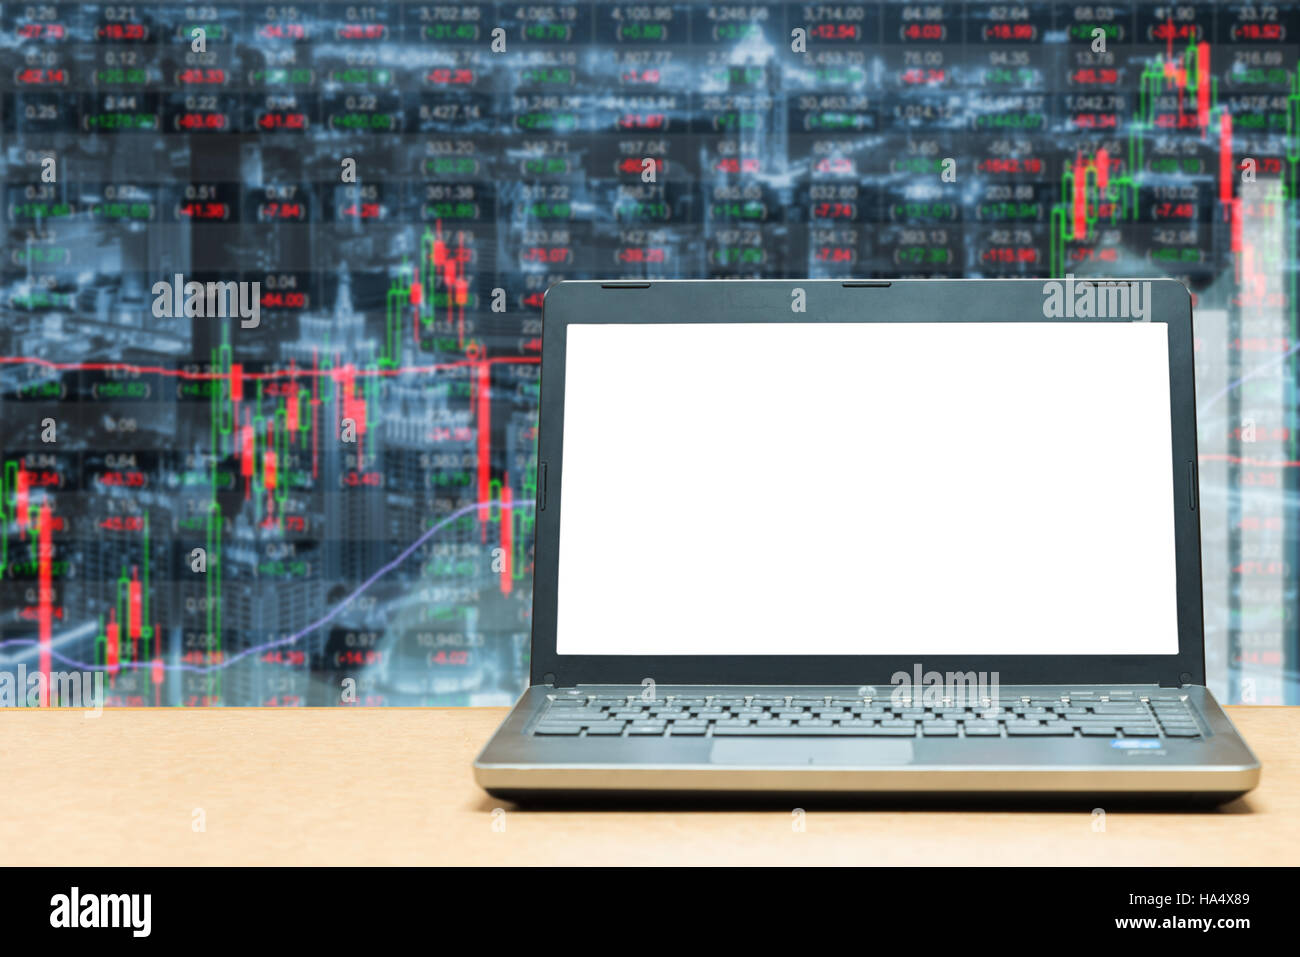 Laptop with blank screen on table with stock exchange market business trading graph. Business marketing trade concept. Stock Photo